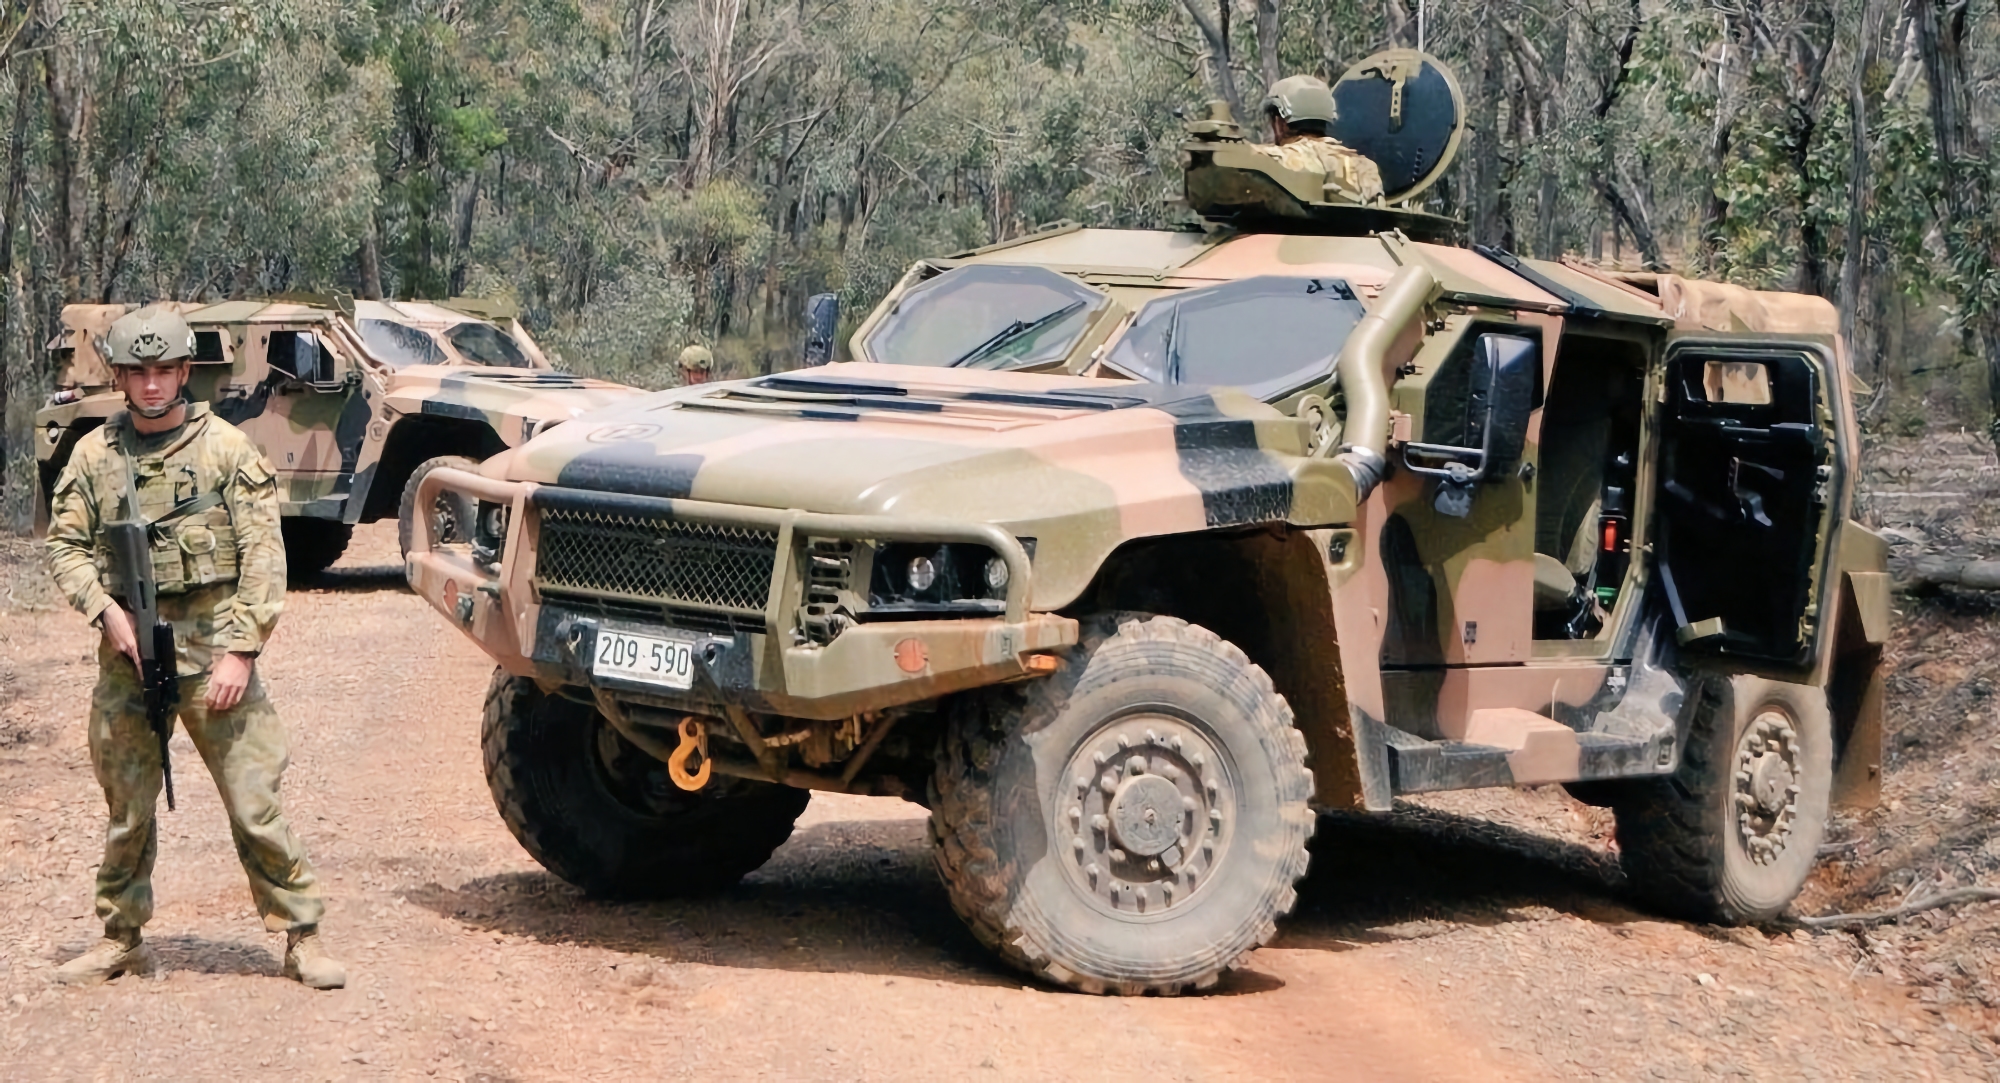 Ukrainian defence minister asks Australia to hand over Hawkei armoured vehicles to AFU